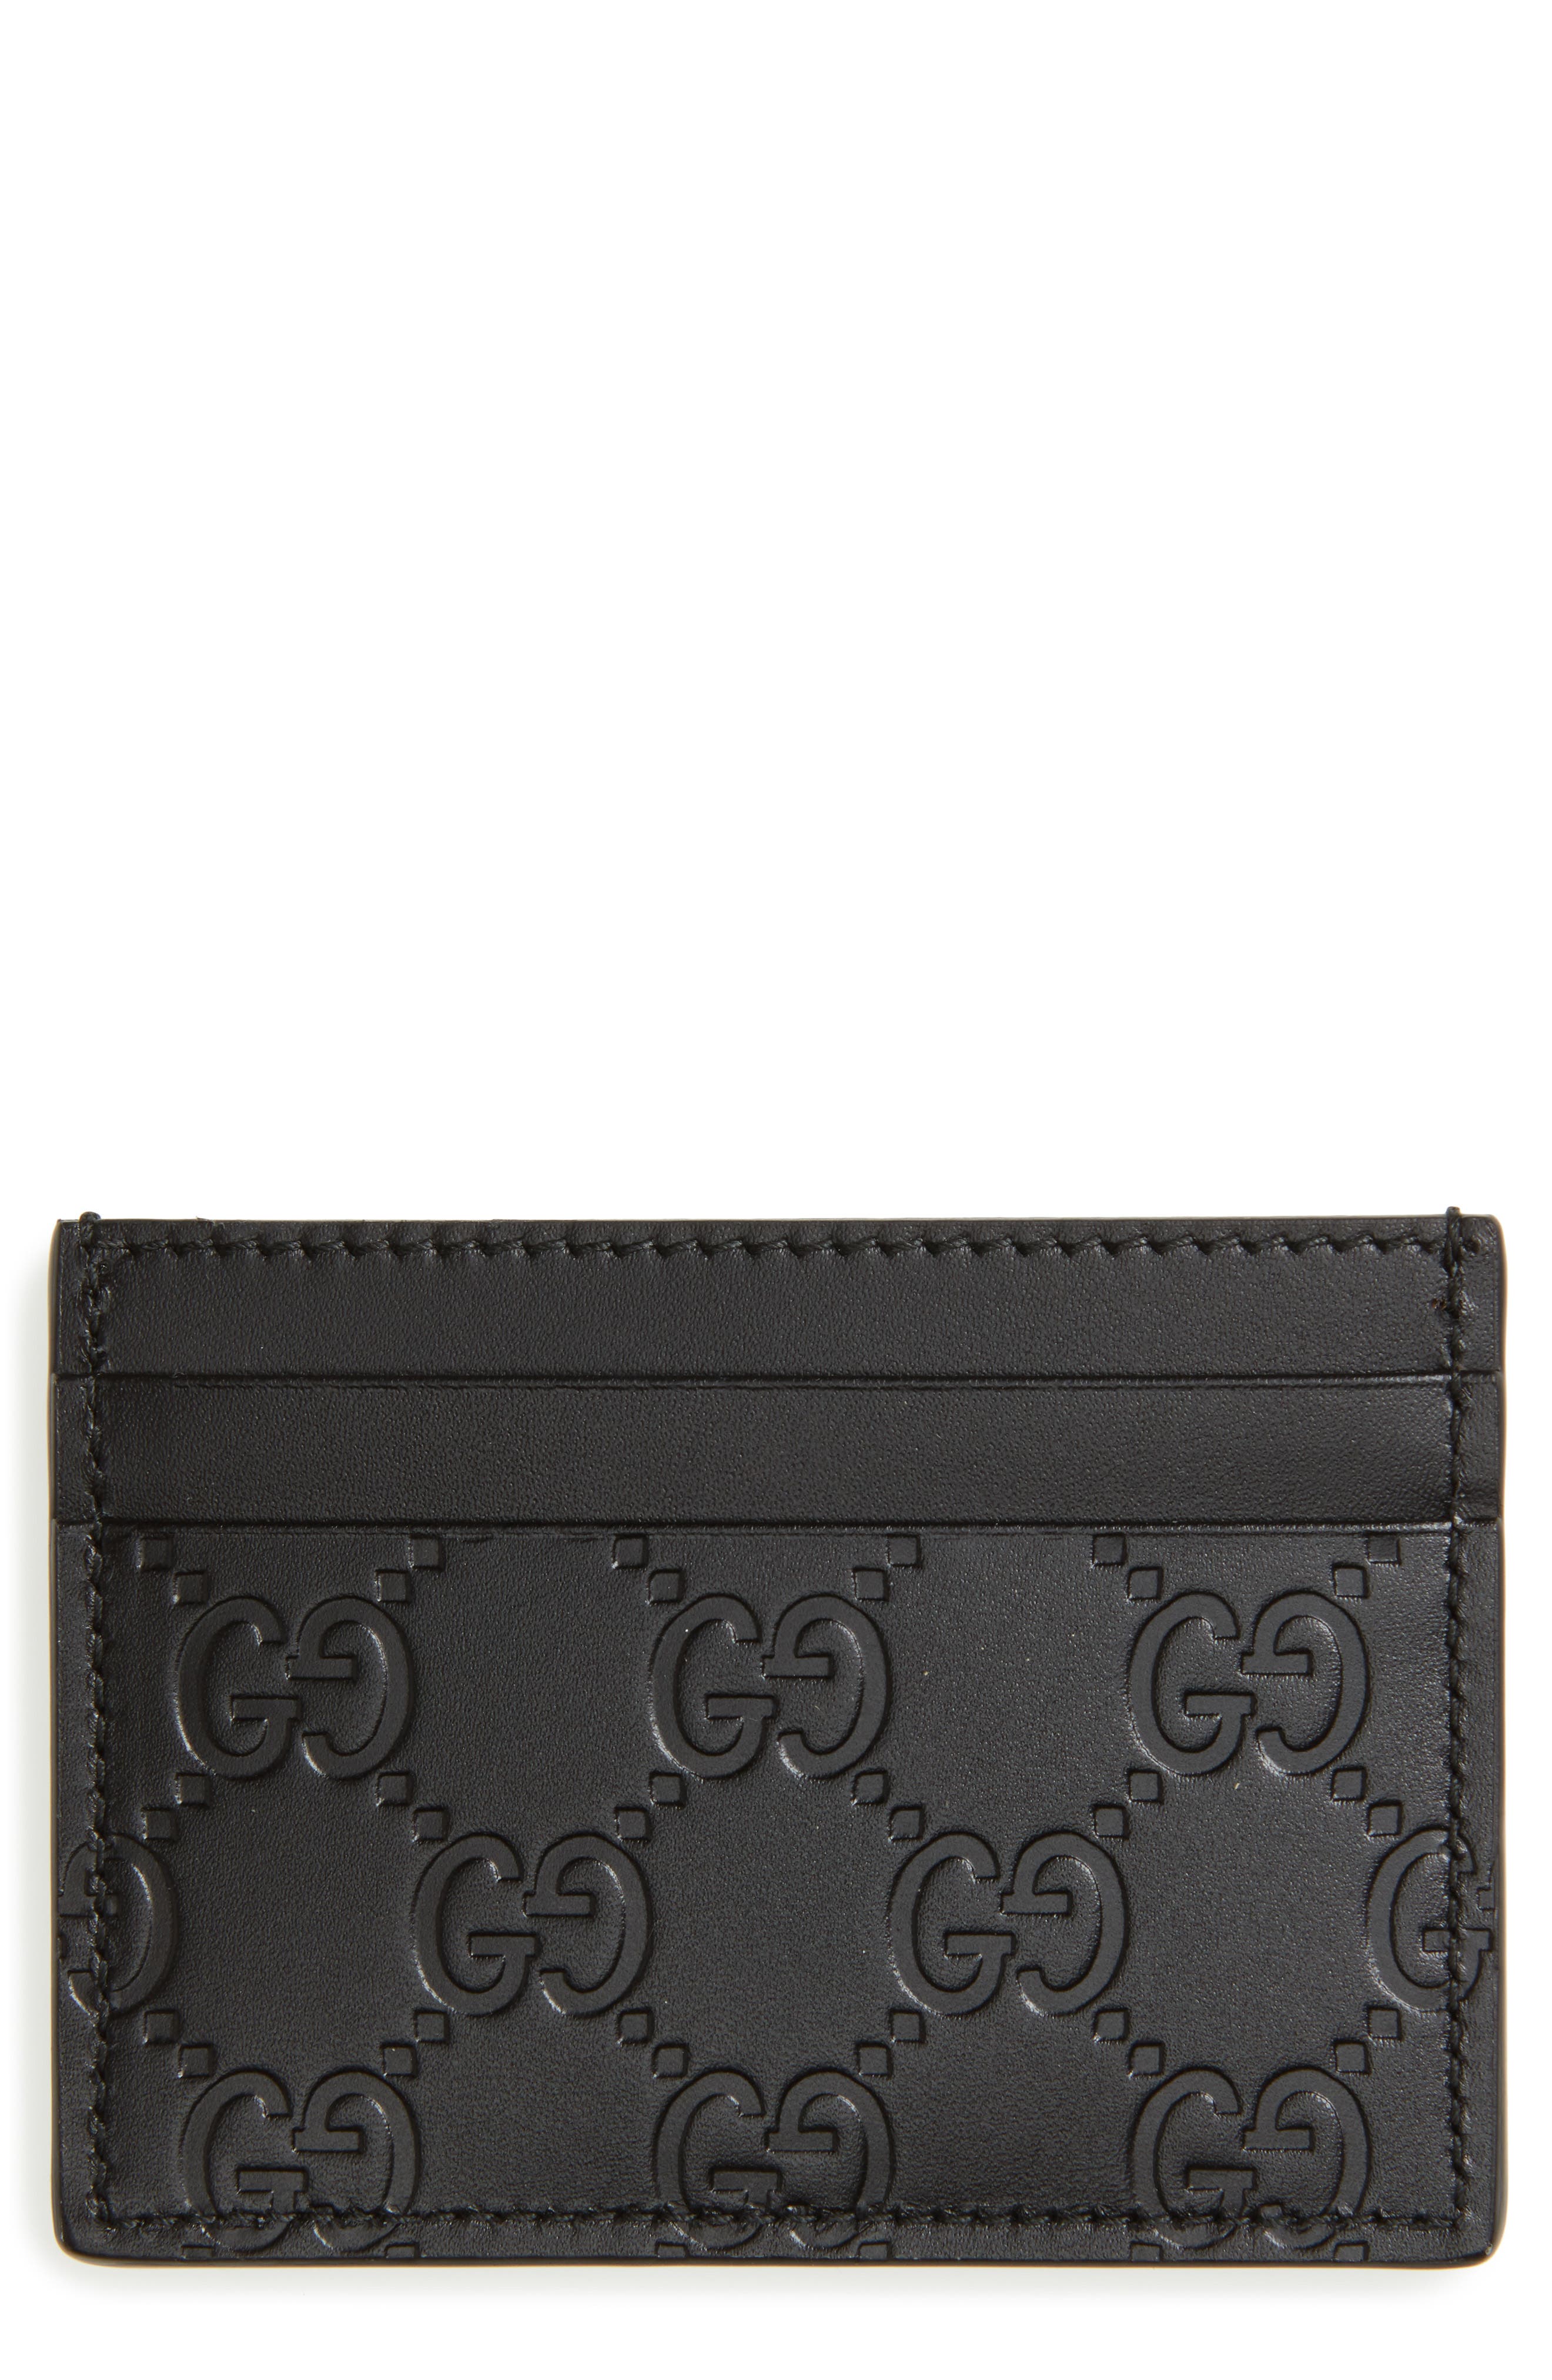 Gucci Leather Card Case | Nordstrom